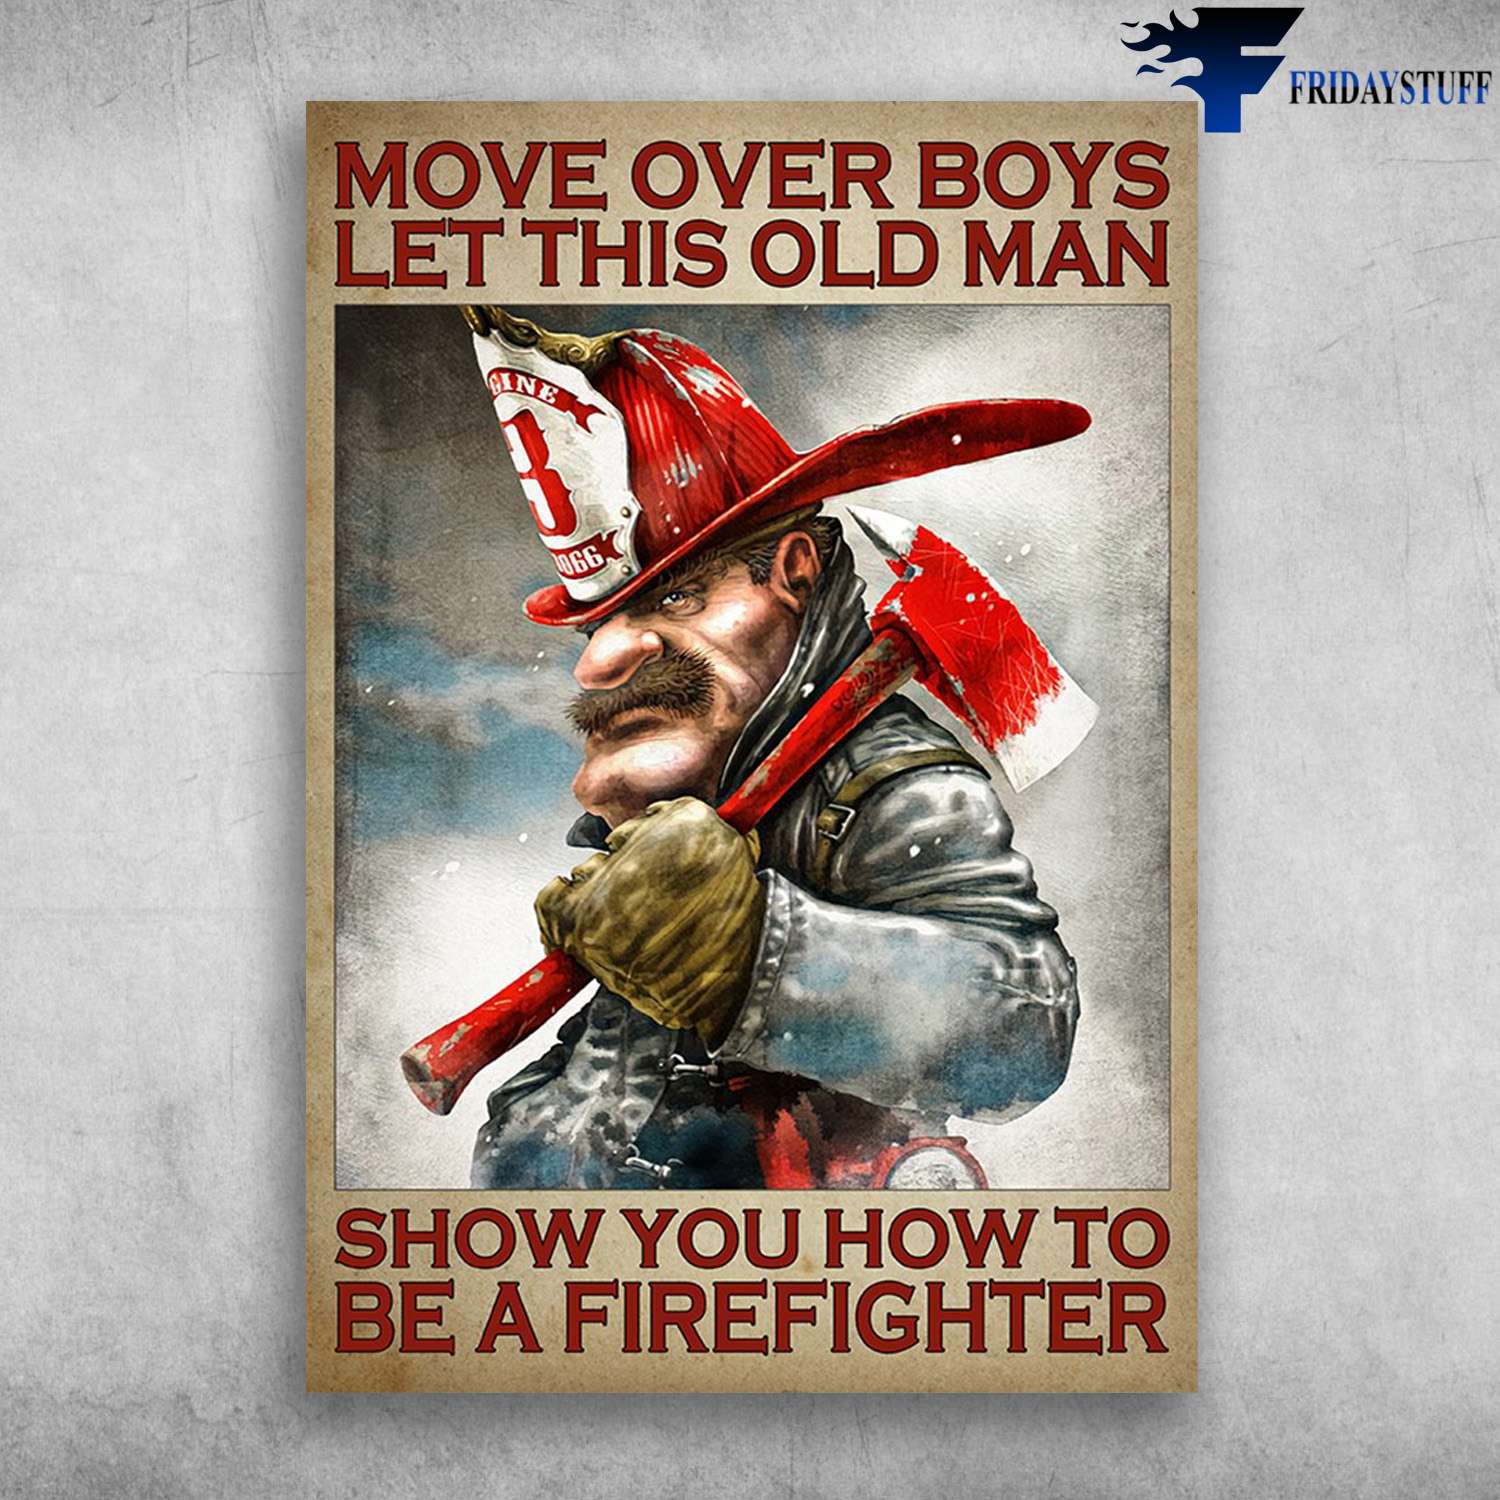 Old Firefighter - Move Over Boys, Let This Old Man, Show You How To Be A Firefighter